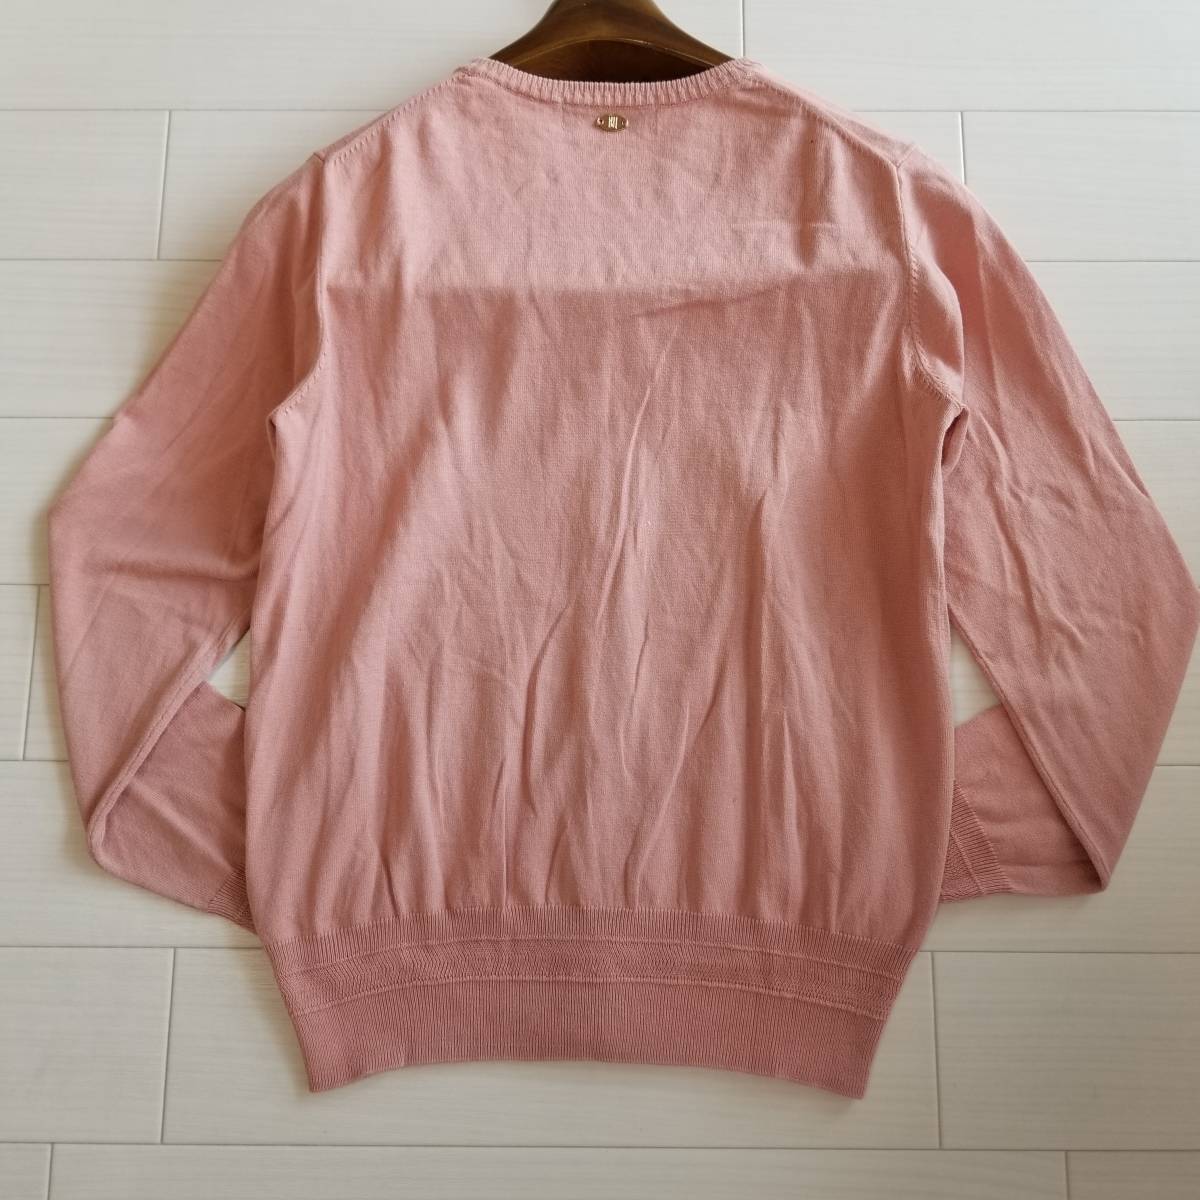 nano*universe Nano Universe knitted cardigan tops round neck button long sleeve lady's size 38 pink mm86